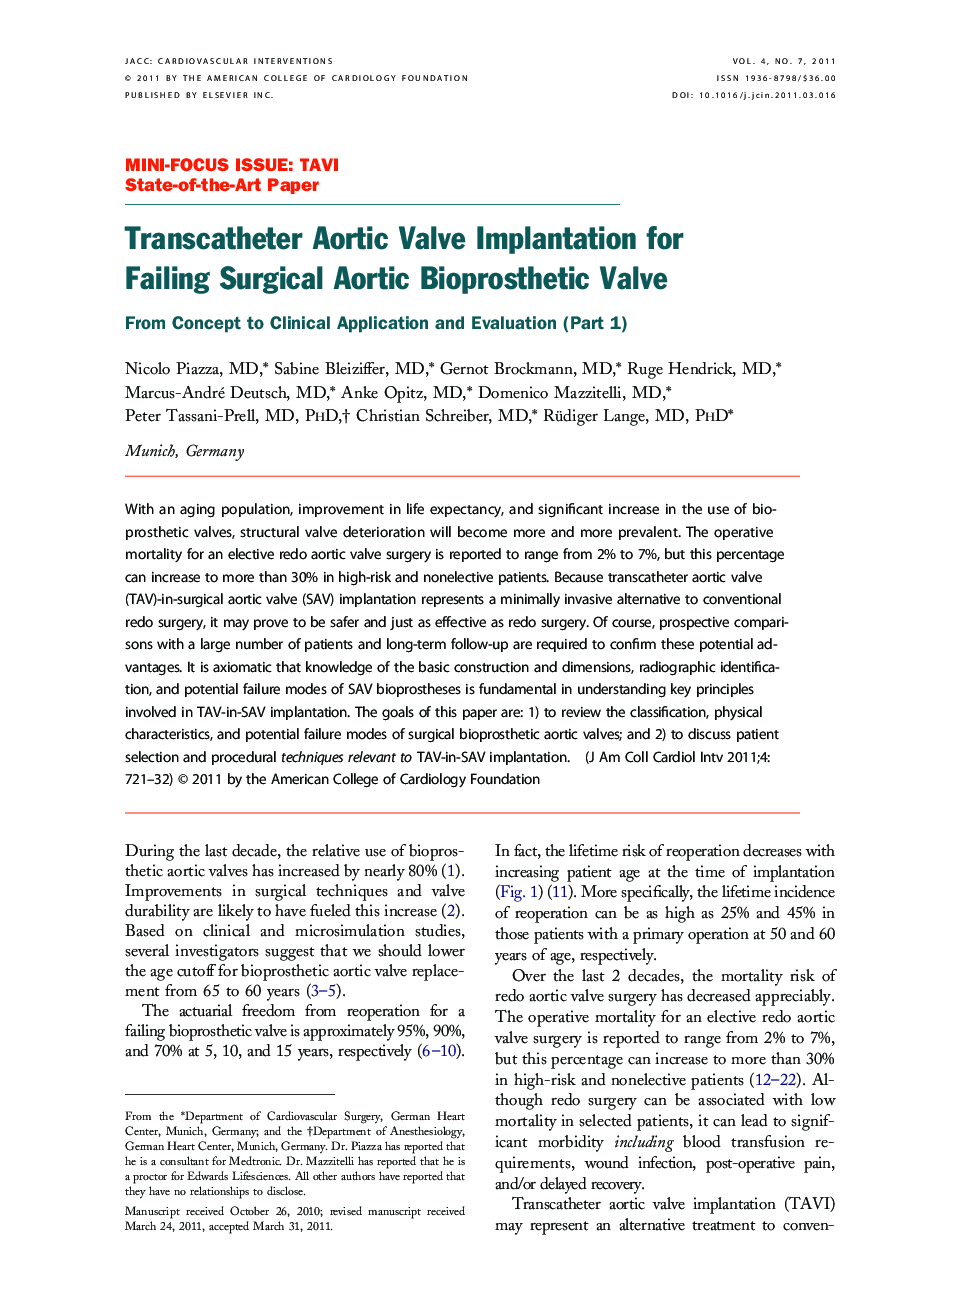 Transcatheter Aortic Valve Implantation for Failing Surgical Aortic Bioprosthetic Valve : From Concept to Clinical Application and Evaluation (Part 1)